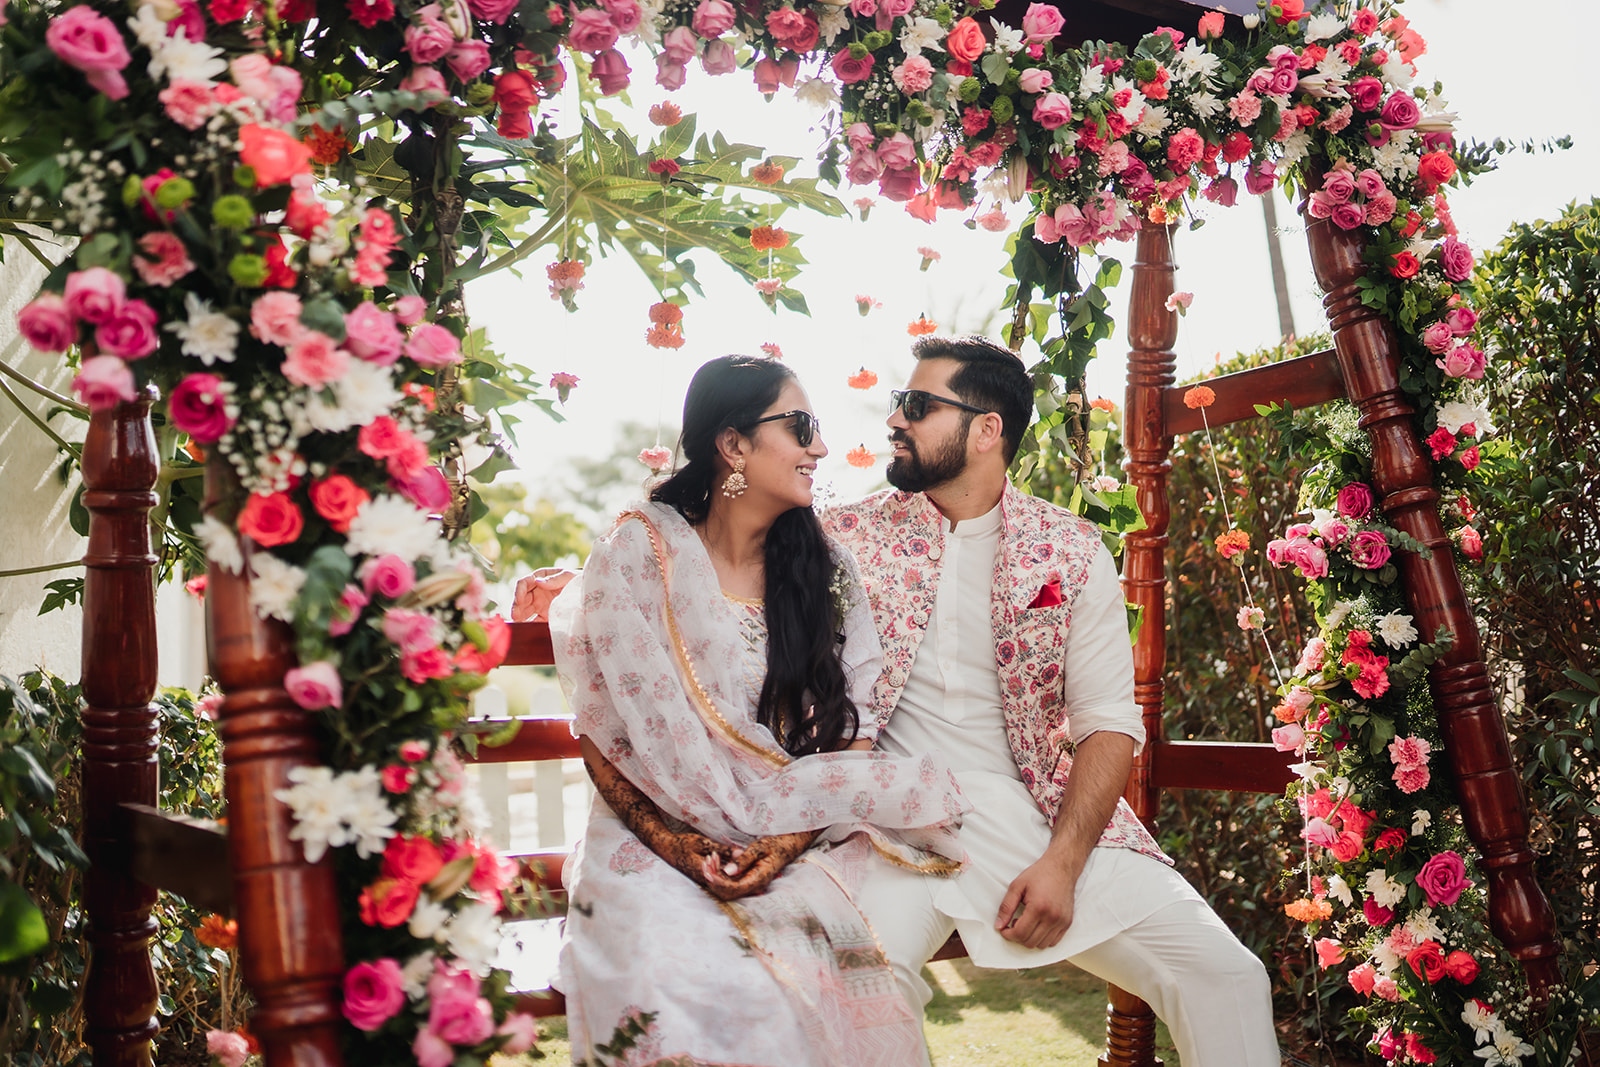 Cultural celebration: The bride and groom pose amidst intricate mehendi decorations, adding beauty to the ceremony.